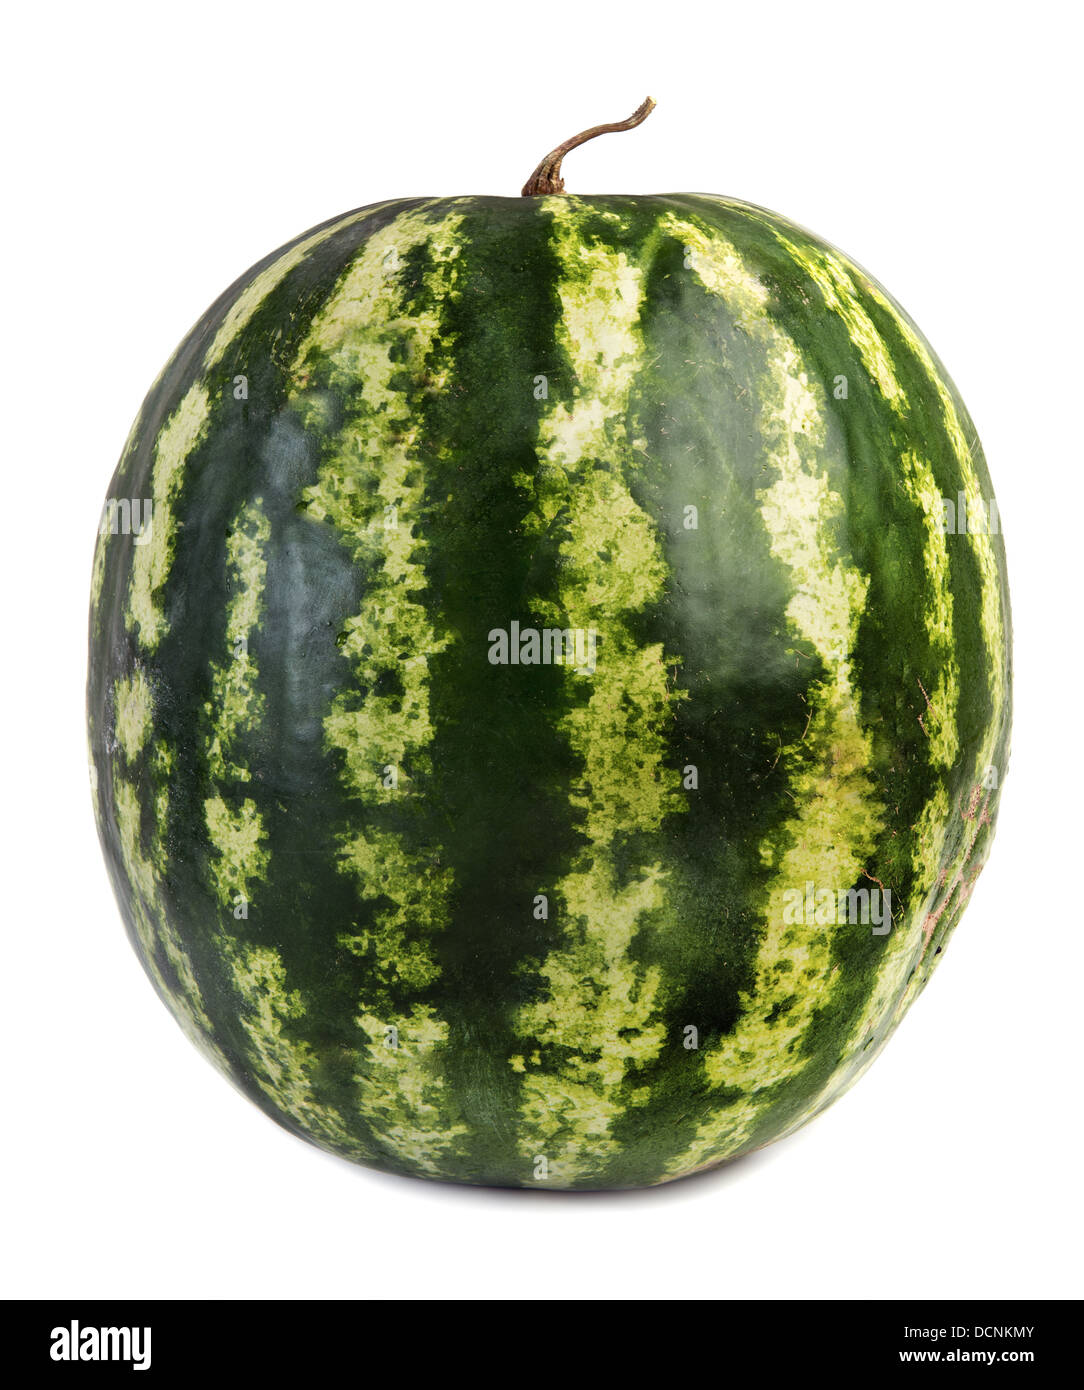 Whole watermelon isolated over white Stock Photo